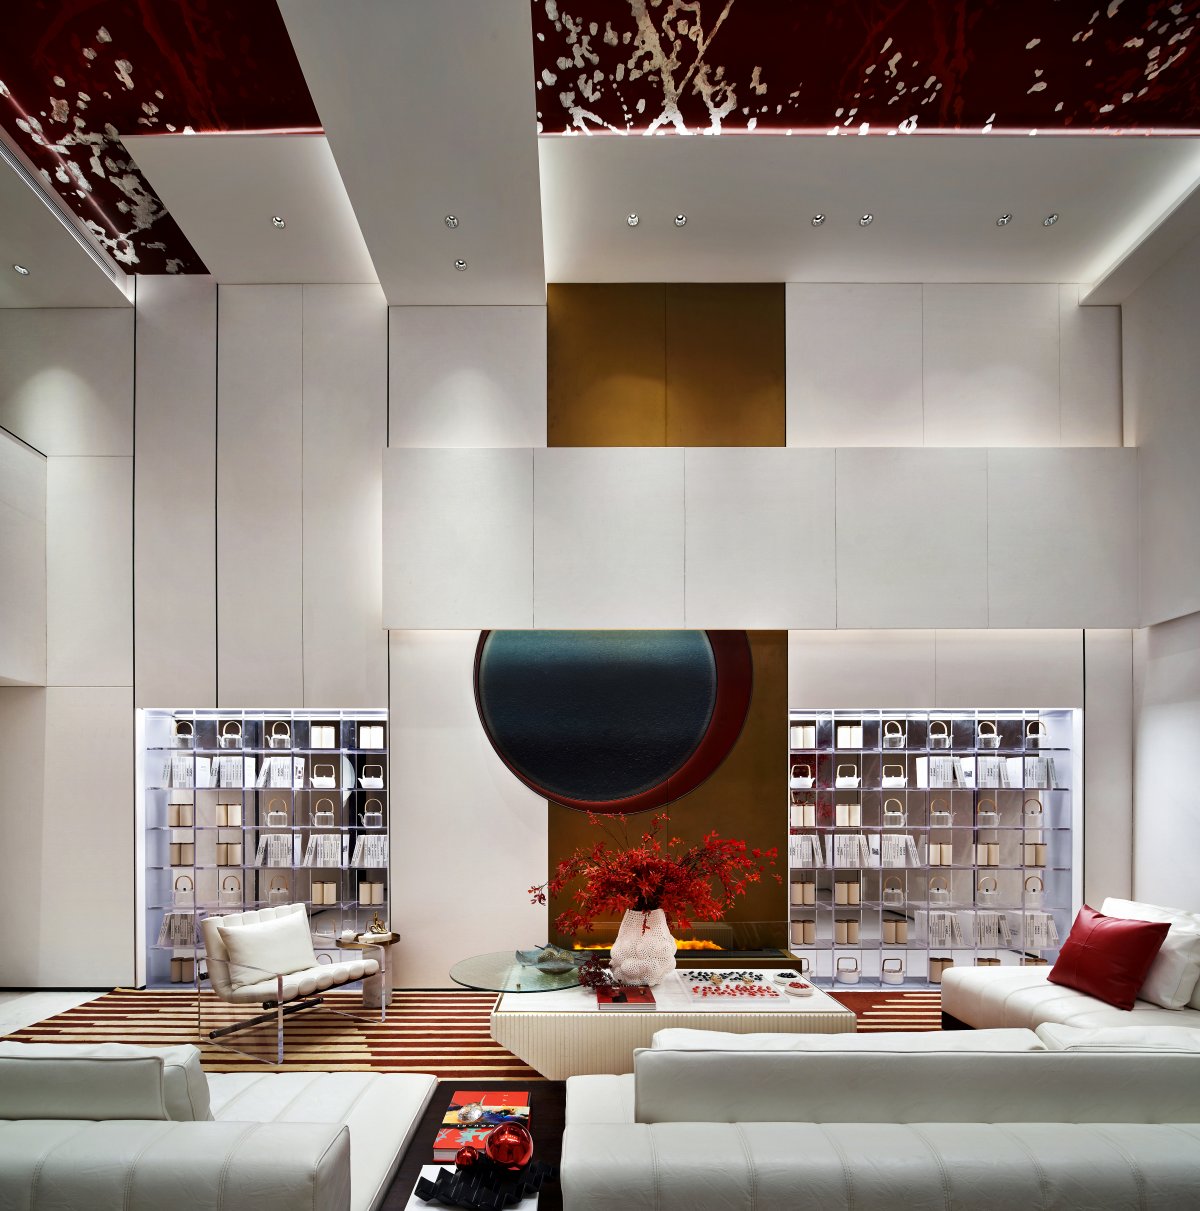 An electrifying moon story told by GBD studio in the luxury villa project - Living Space